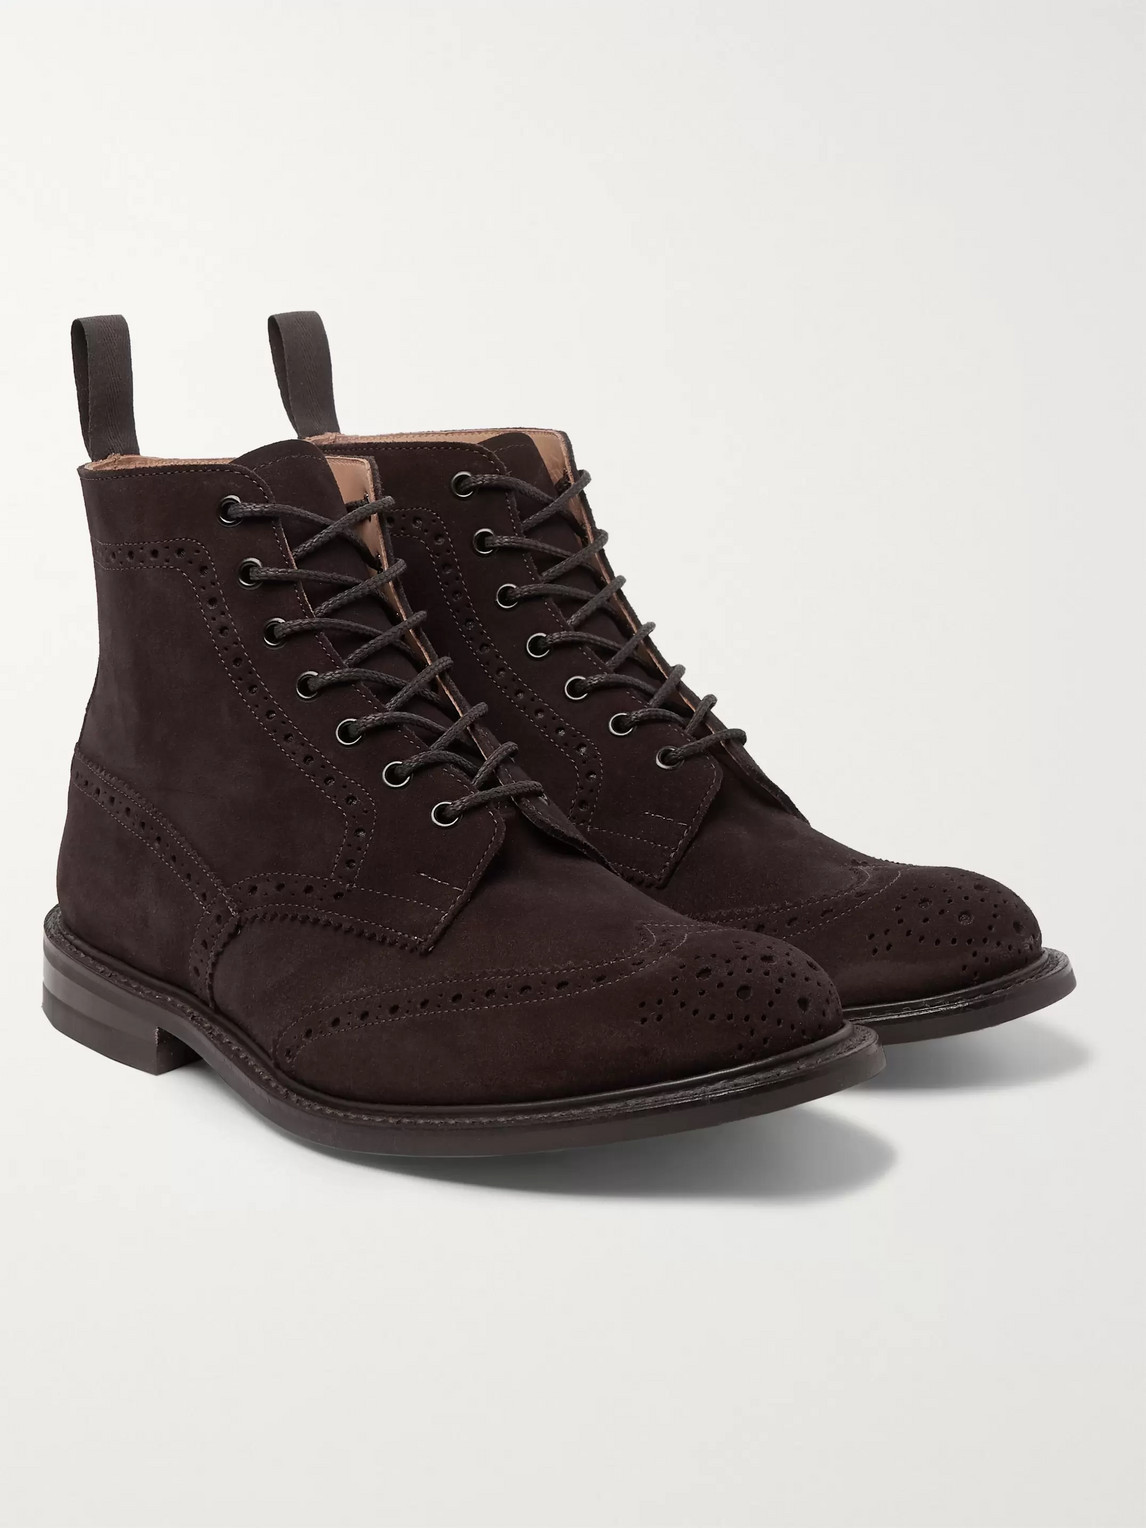 Tricker's Stow Suede Brogue Boots In Brown